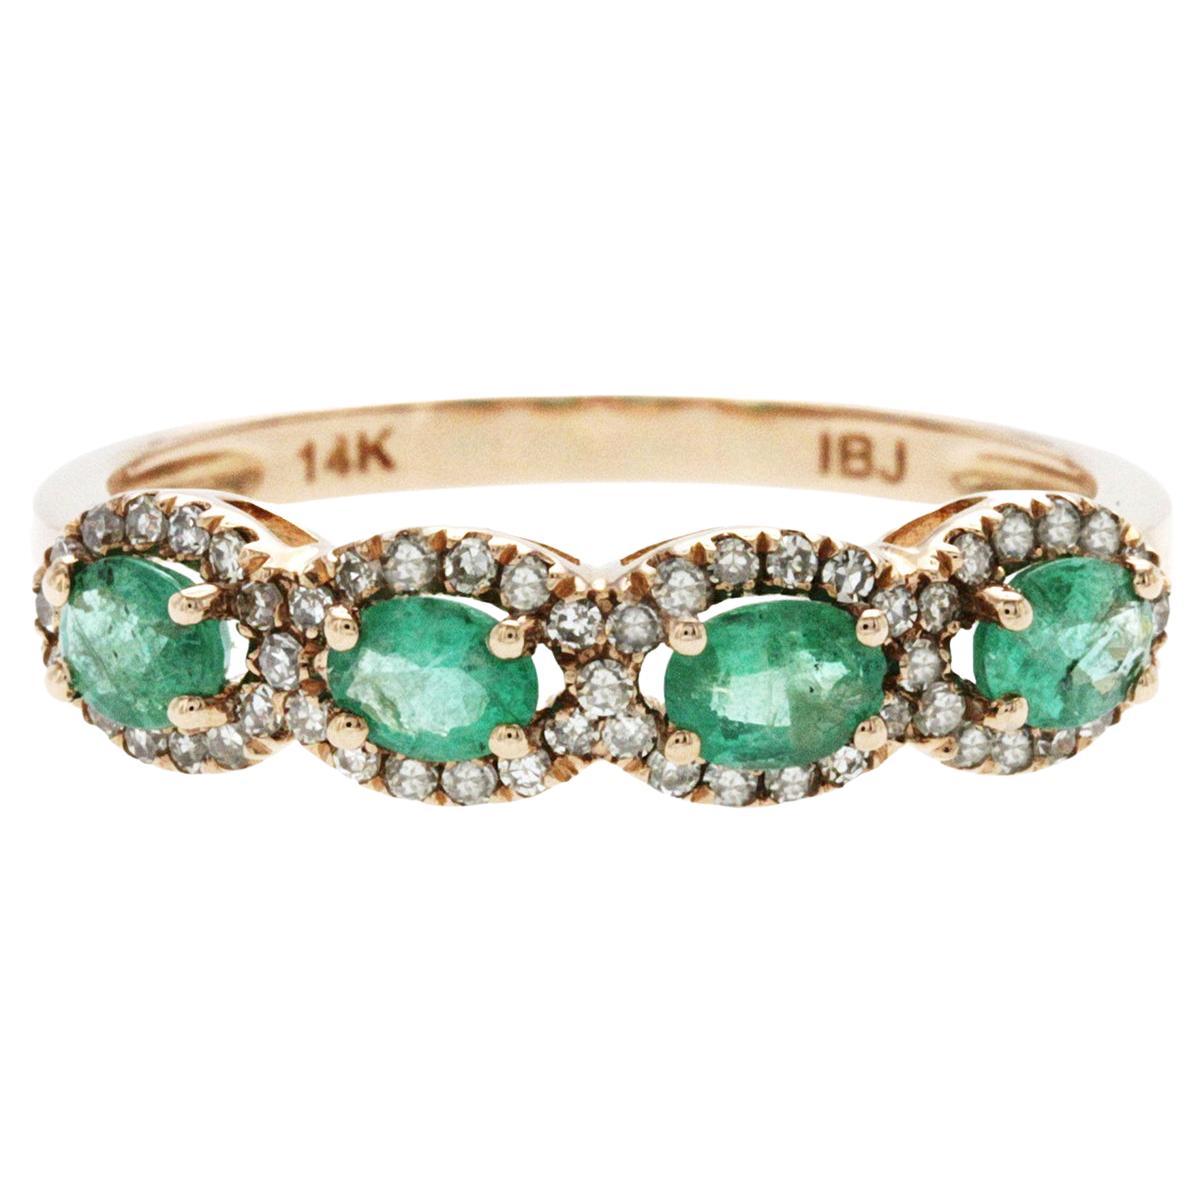 0.40 CT Colombian Emerald & 0.24 CT Diamonds 14K Rose Gold Wedding Band Ring